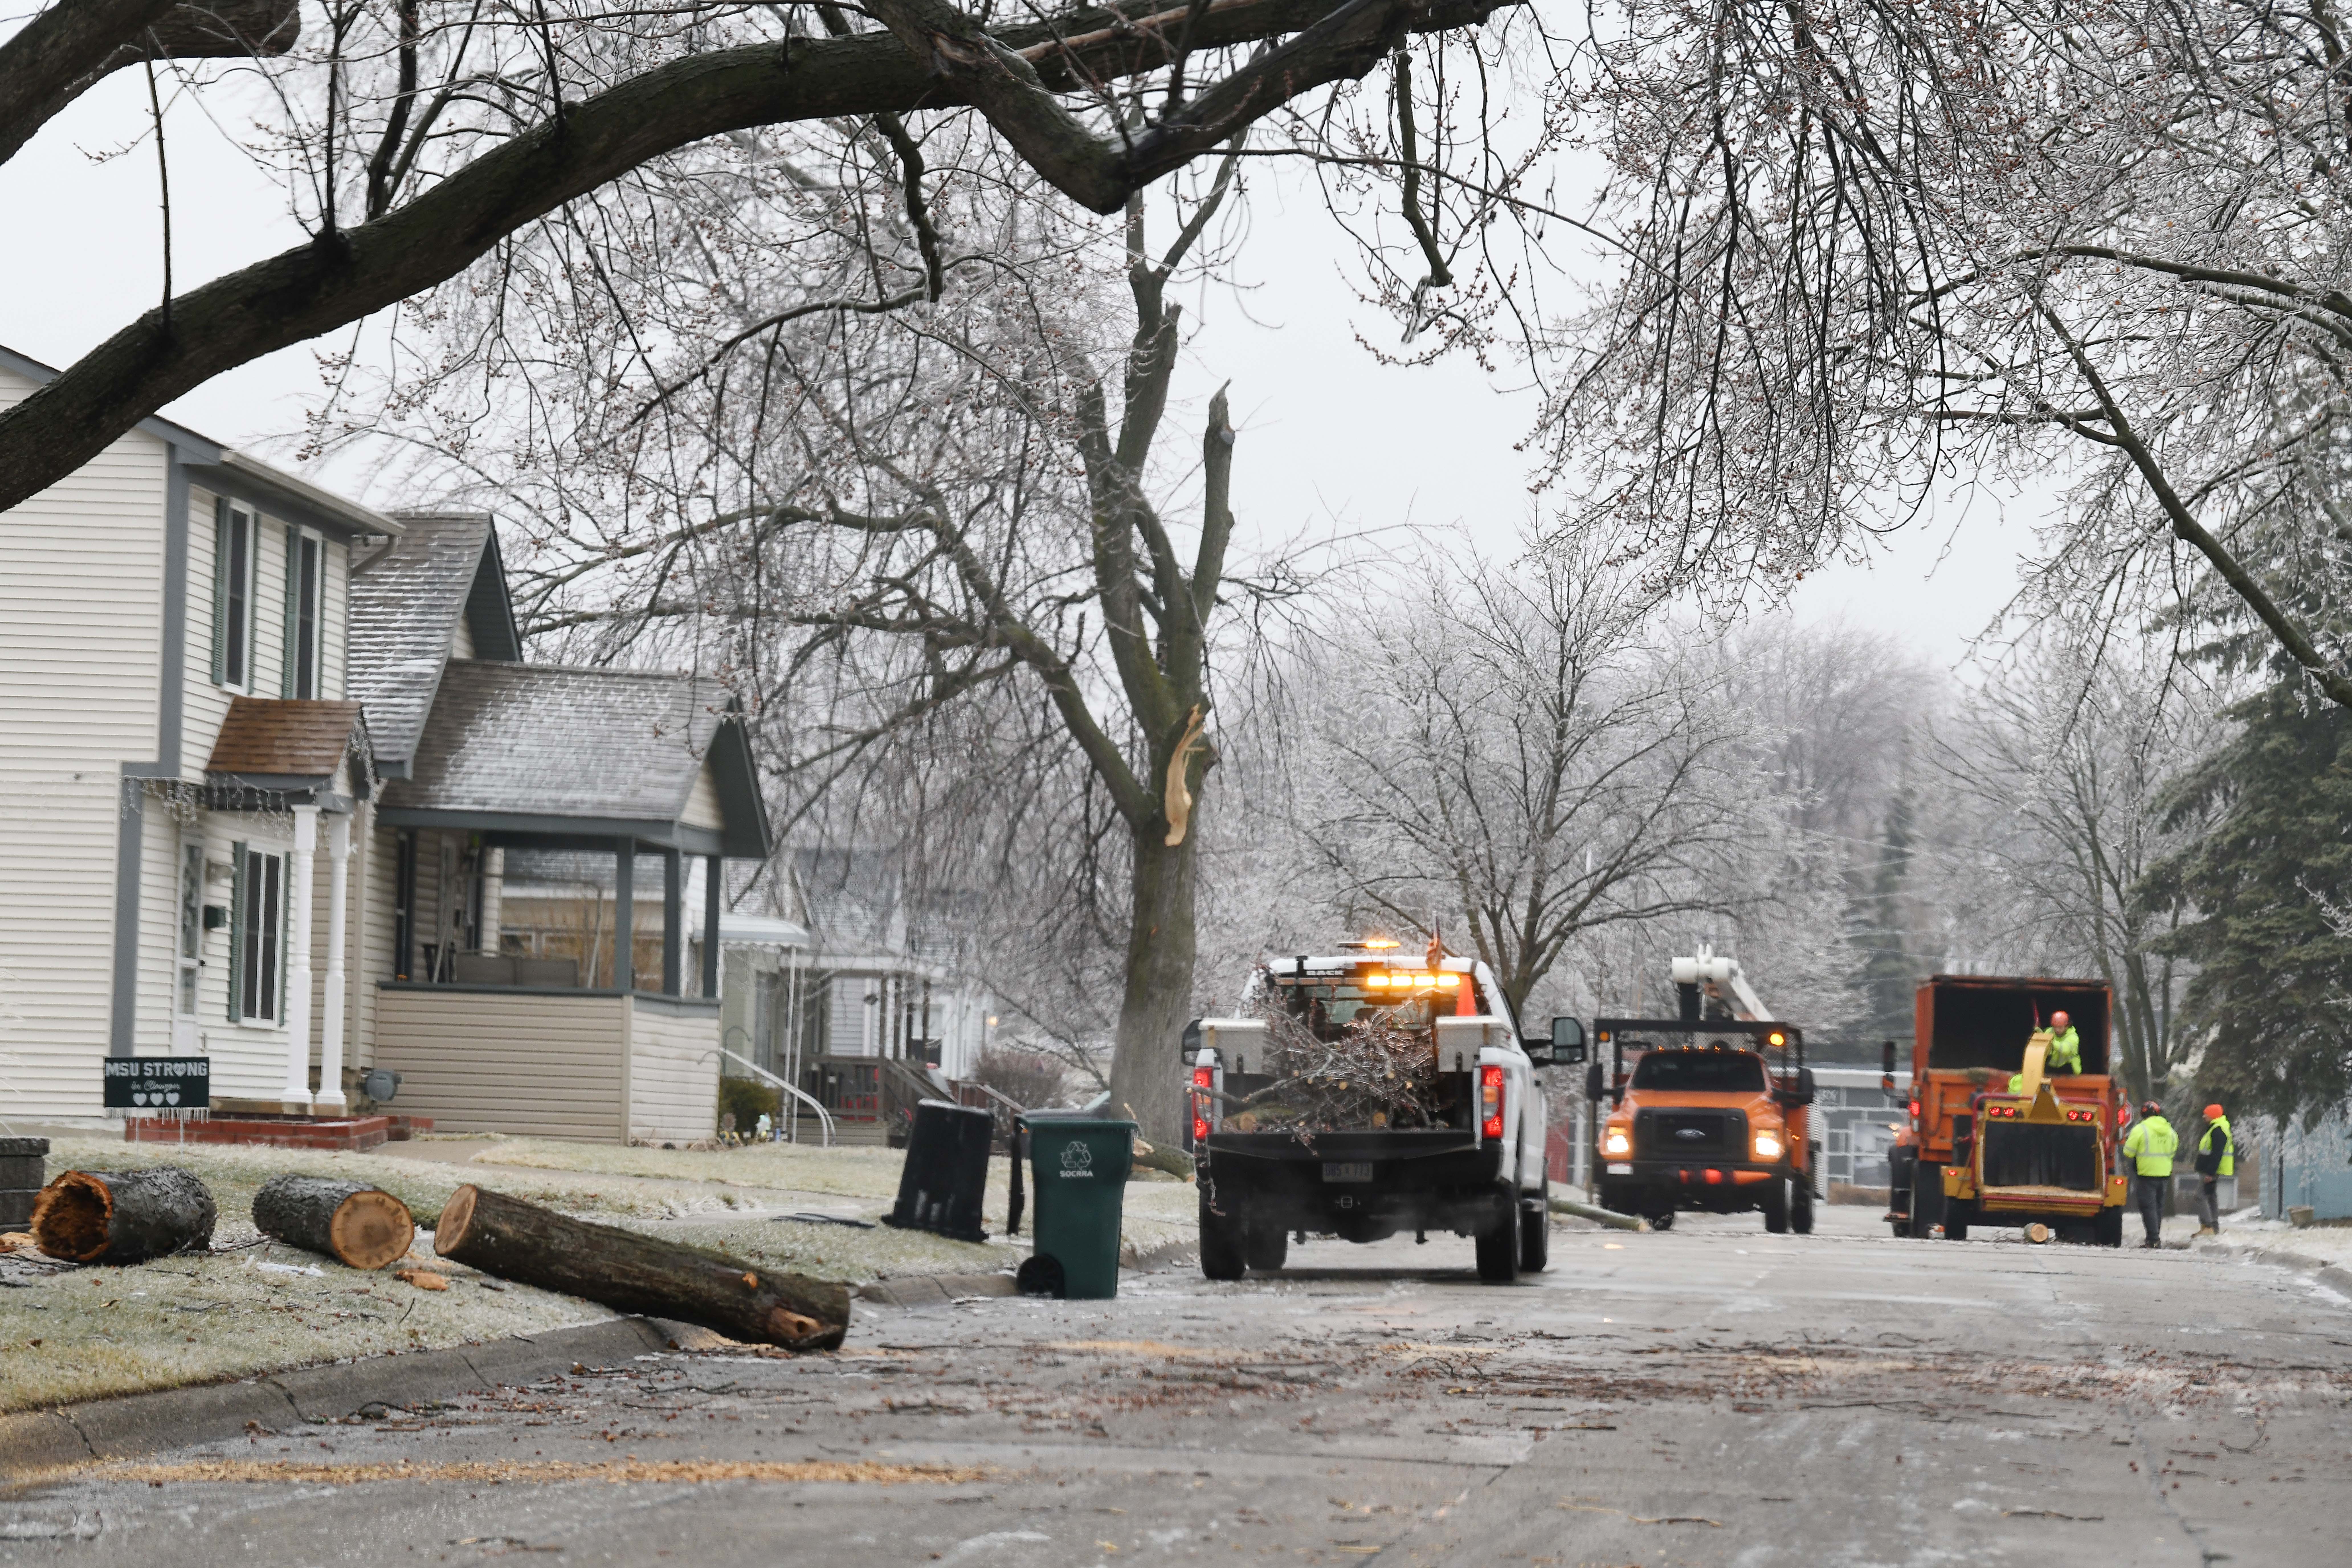 Work crews clear downed tree limbs on Nakota in Royal Oak from the overnight ce storm in Royal Oak, Michigan on February 23, 2023.